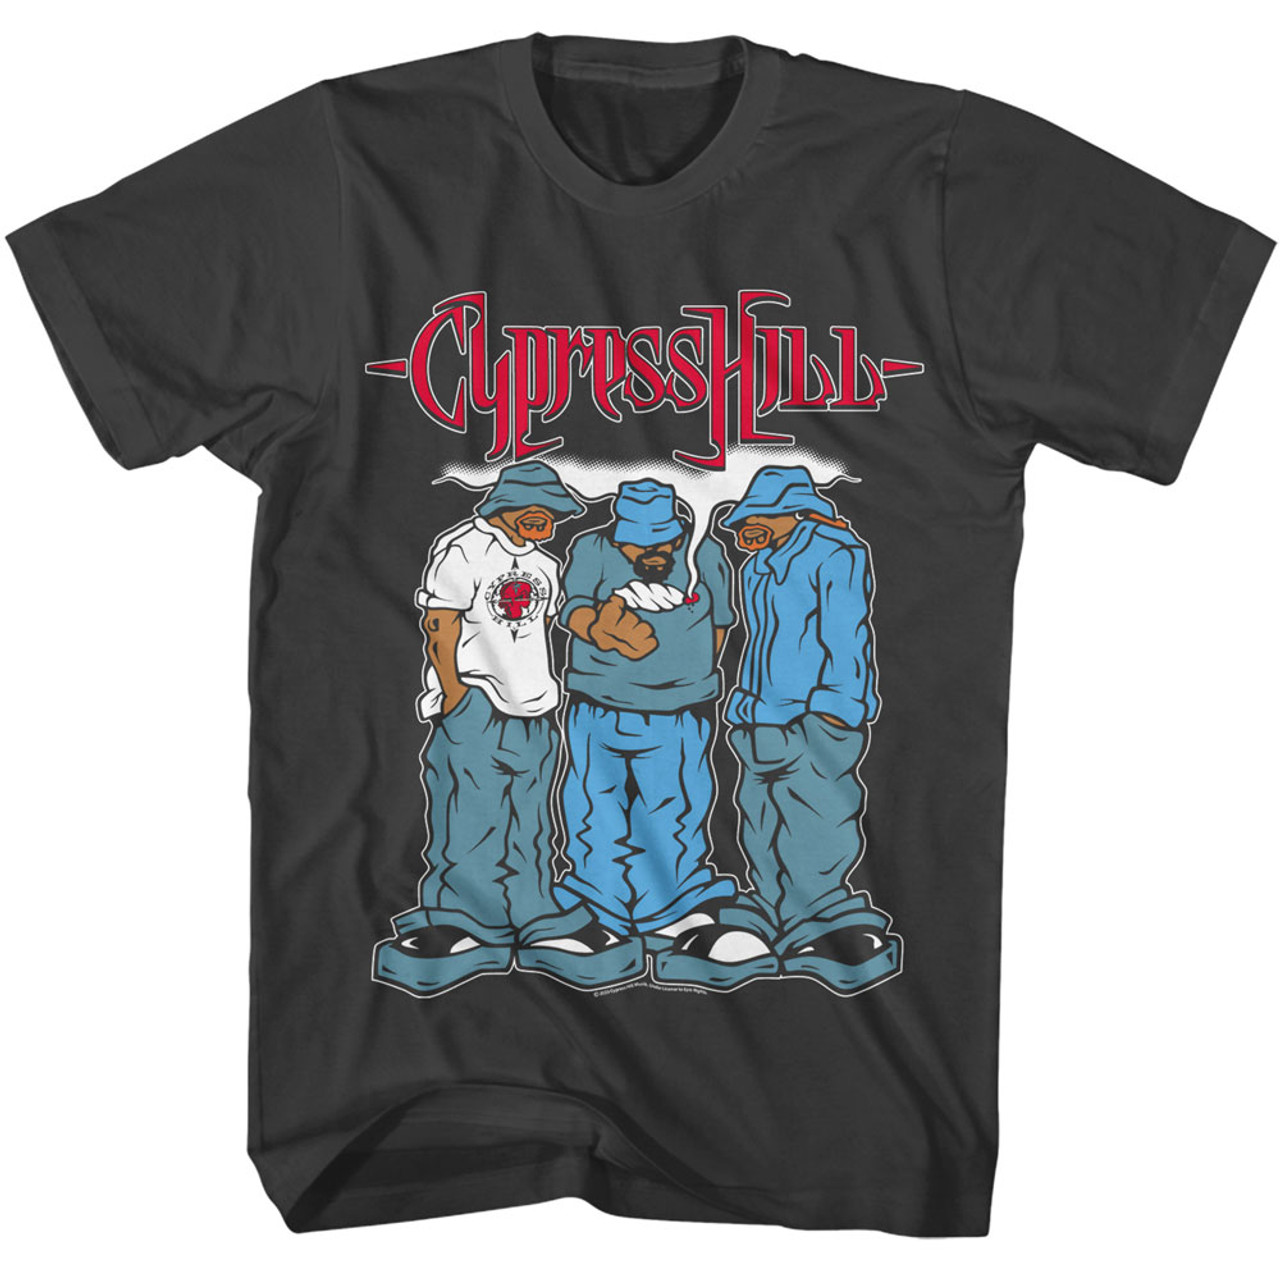 Cypress Hill Blunted T-Shirt - Old School Tees